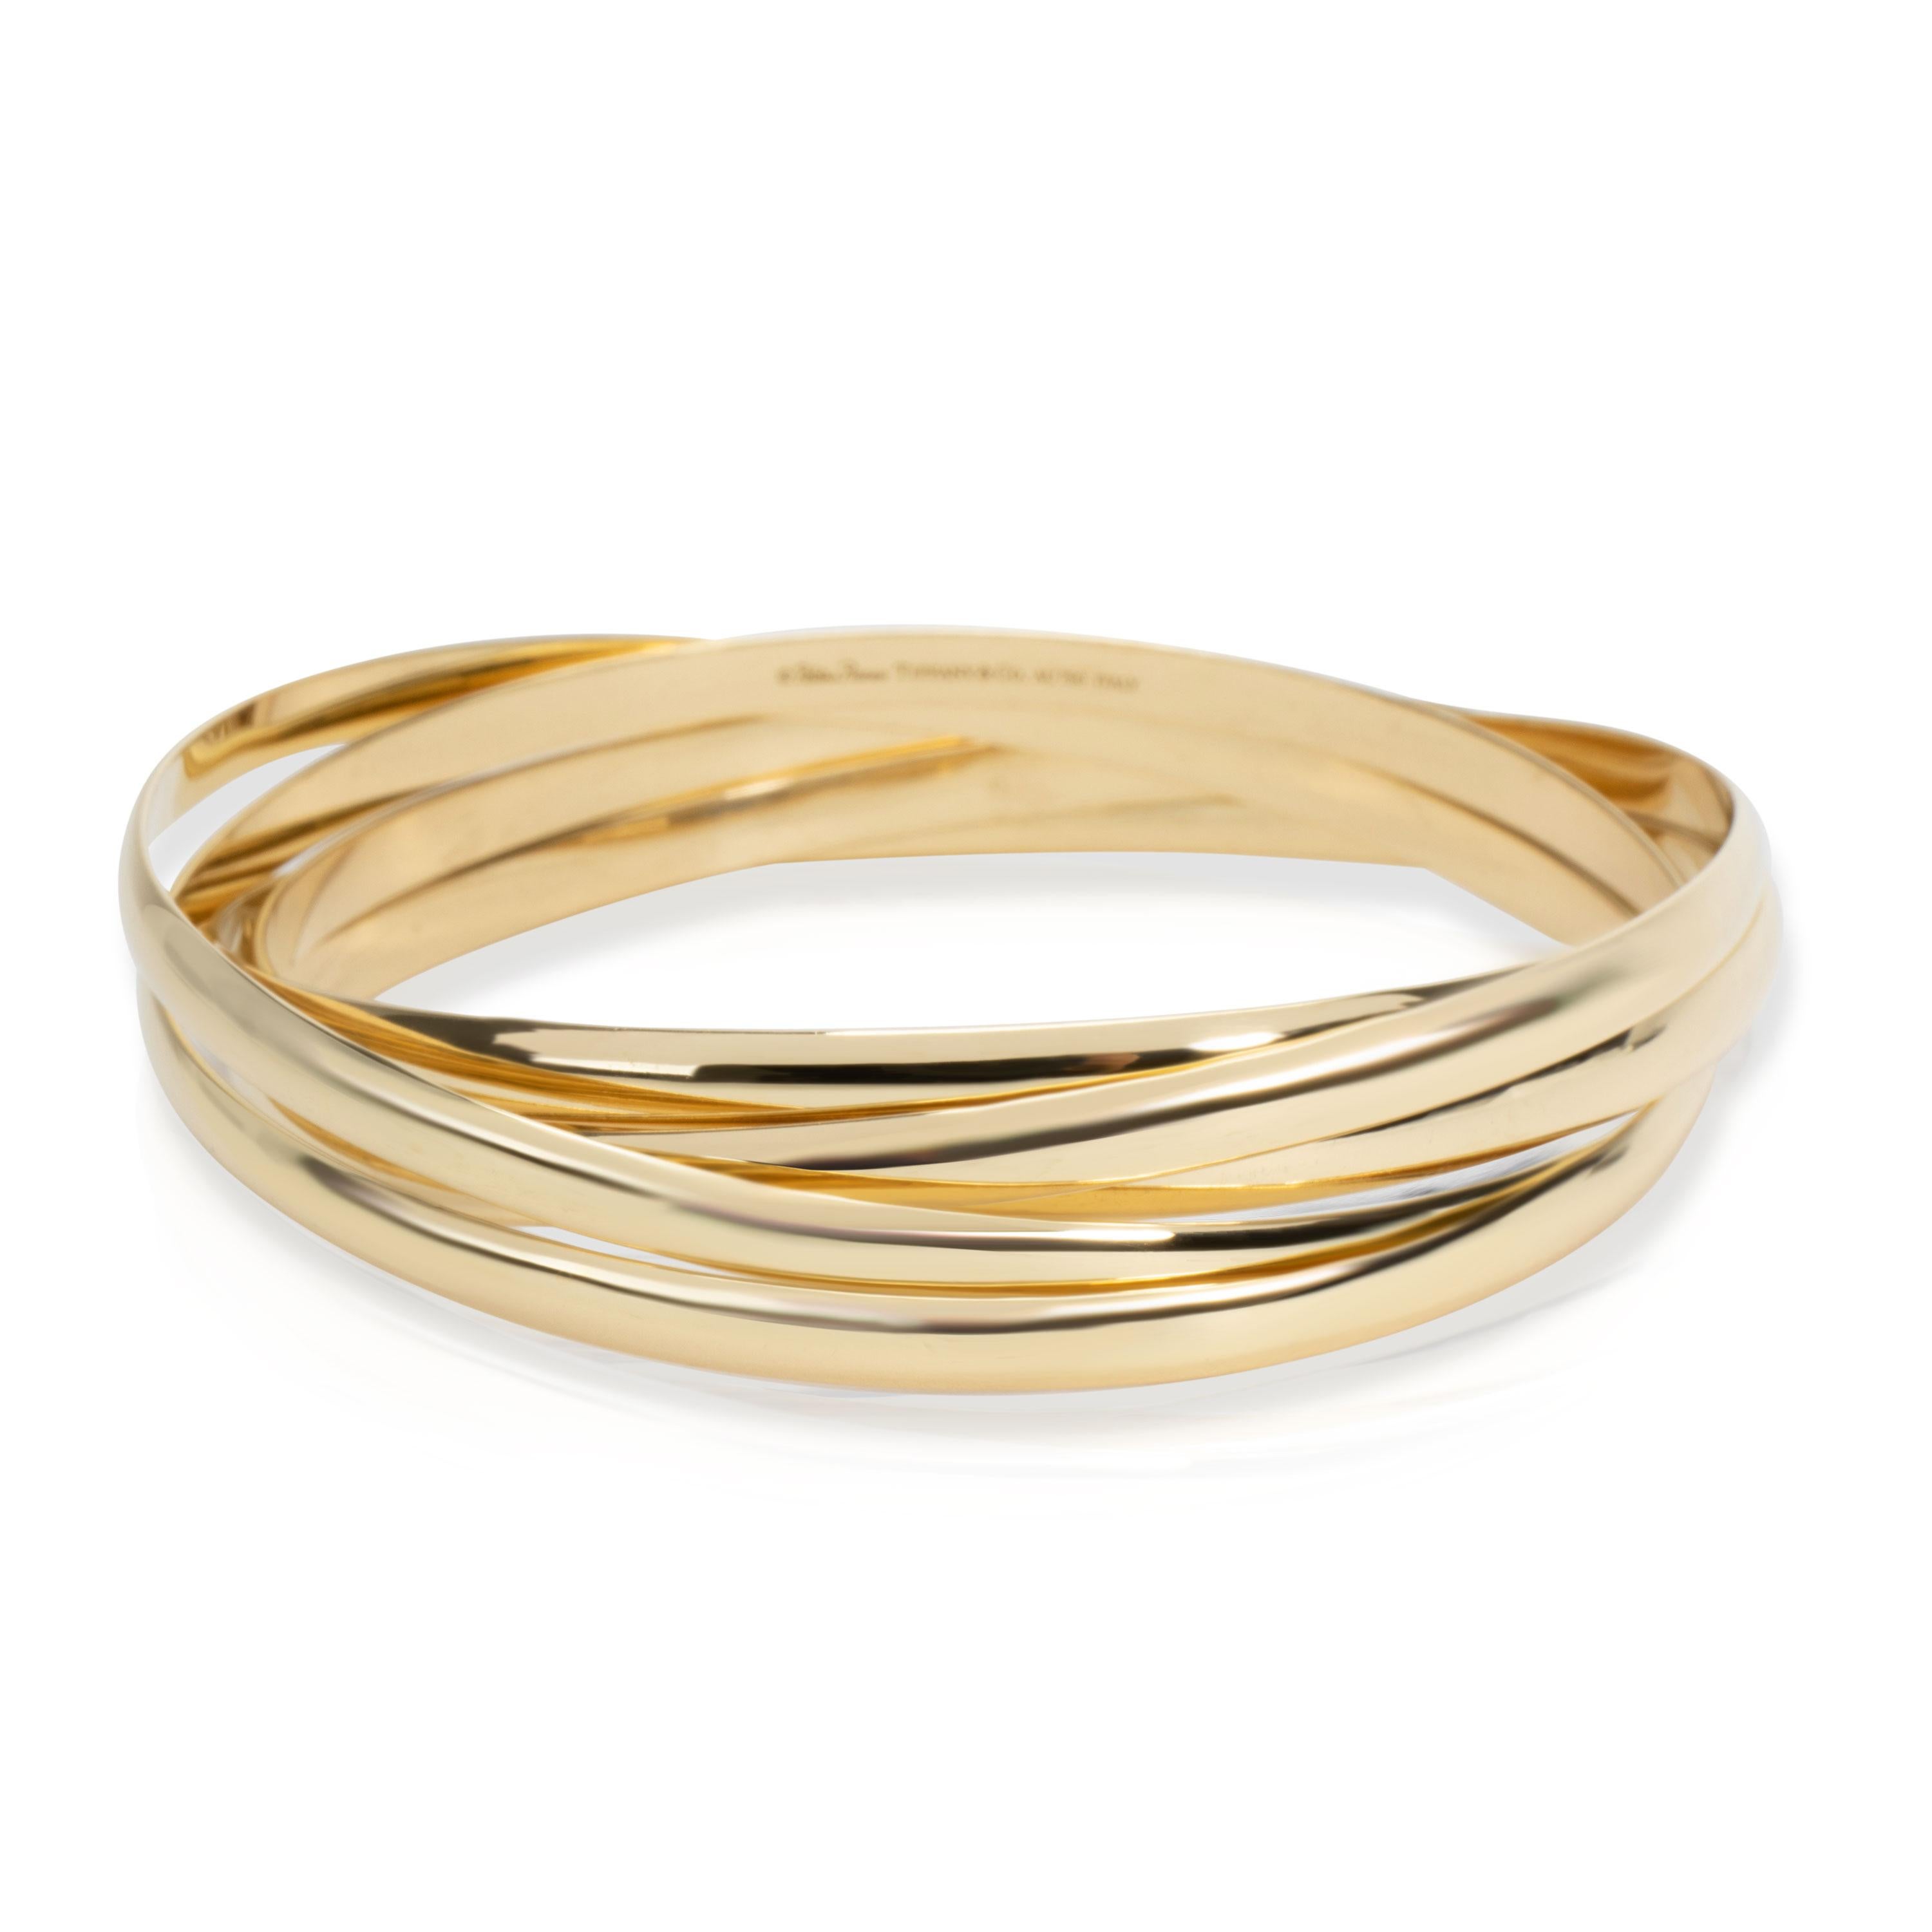 Tiffany & Co. Paloma's Melody Bangle in 18K Yellow Gold

SKU: 105835

Tiffany & Co. Paloma's Melody Bangle in 18K Yellow Gold

Condition Description: Retails for 8000 USD. In excellent condition and recently polished. Fits a 7.25 inch wrist.

Brand: